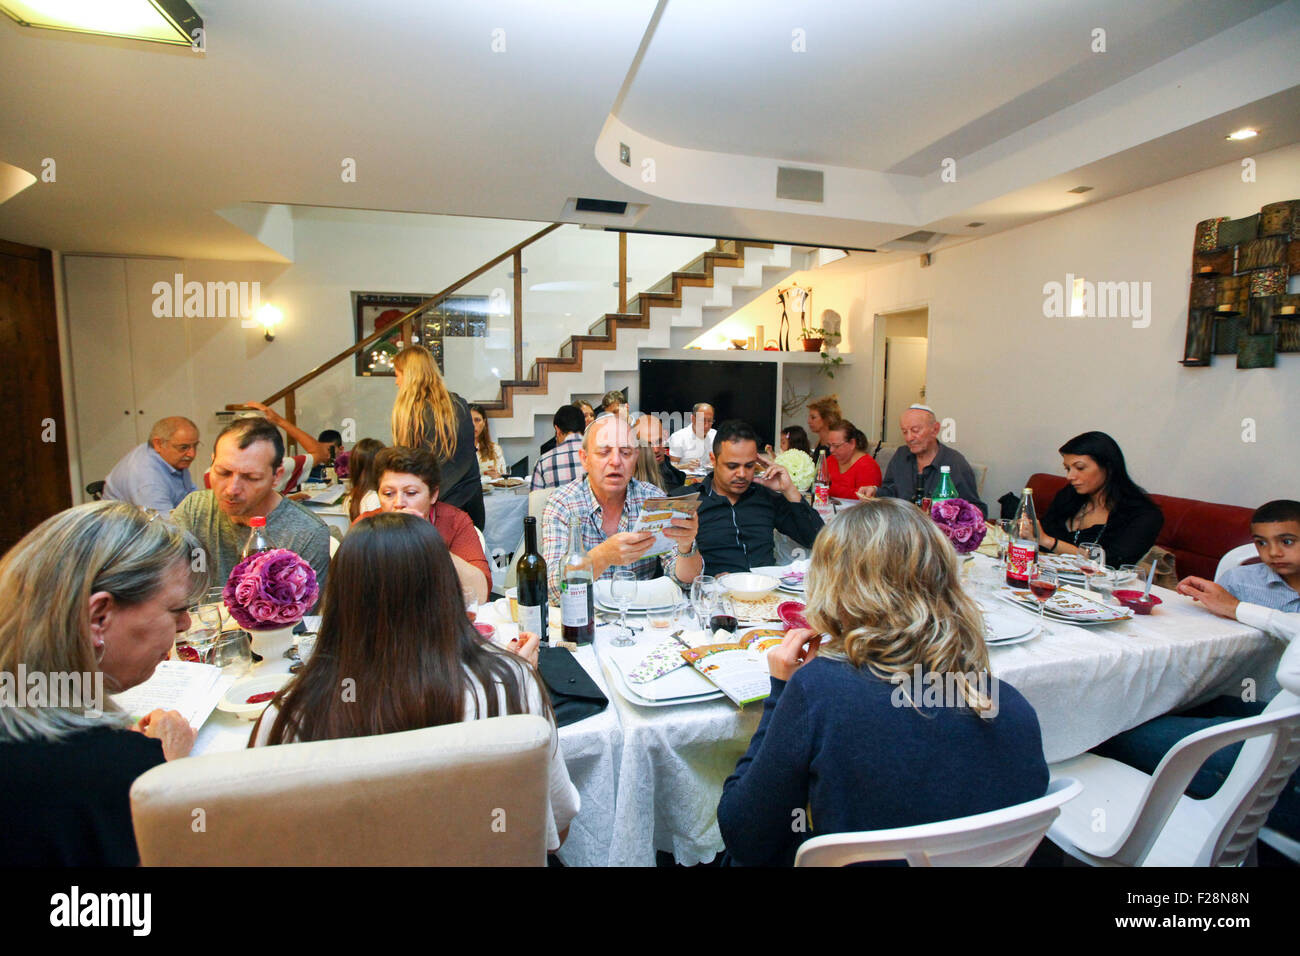 family sitting around a table set for a Jewish Festive meal on Passover (transliterated as Pesach or Pesah) Stock Photo